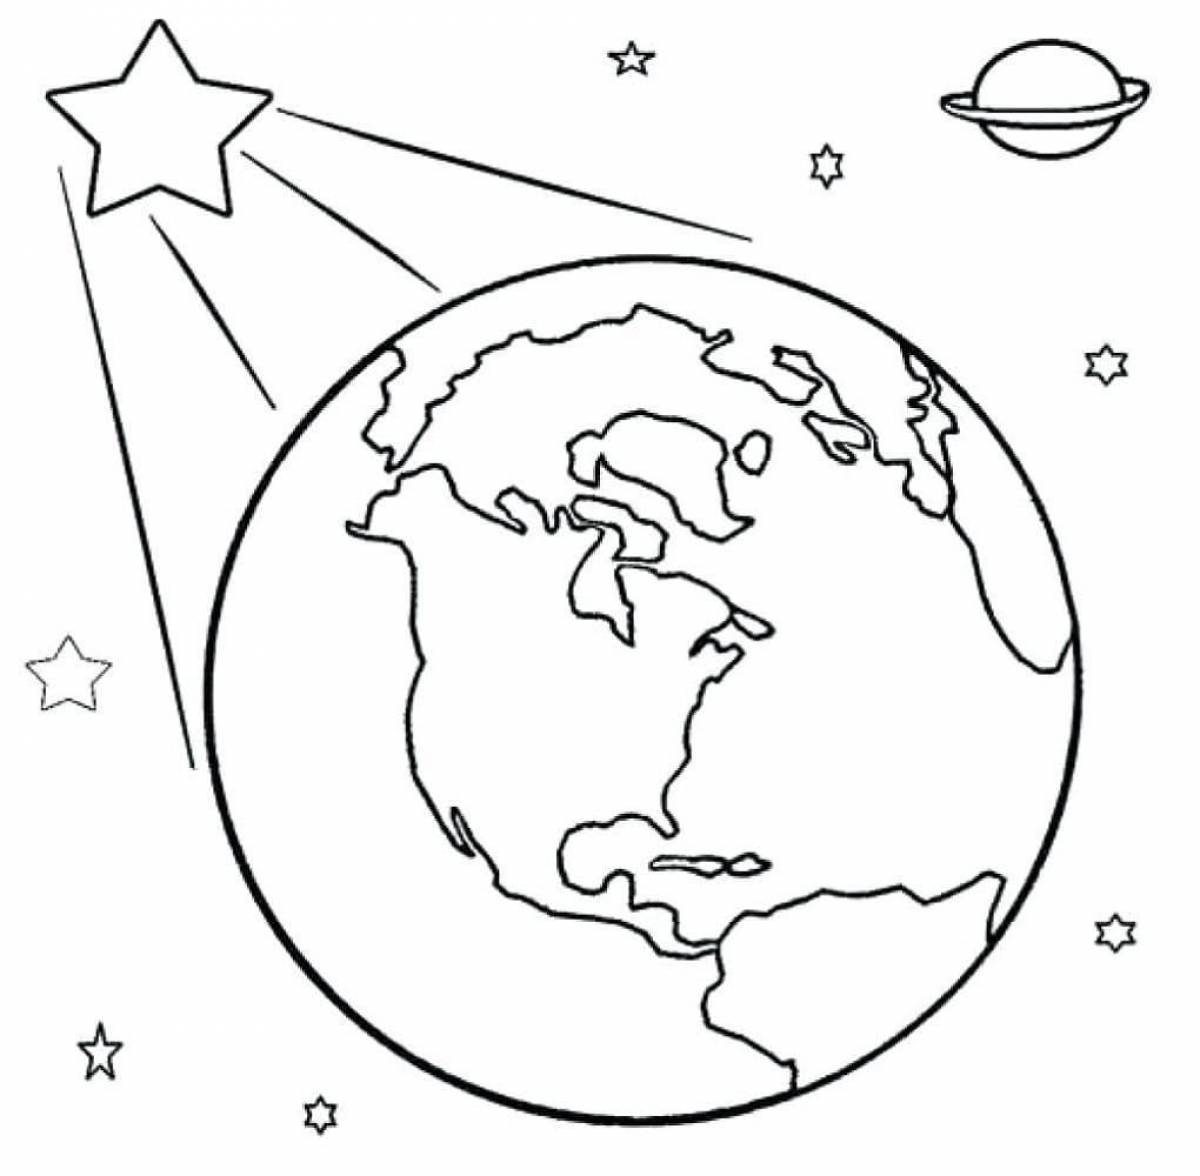 Colourful planet earth coloring pages for kids